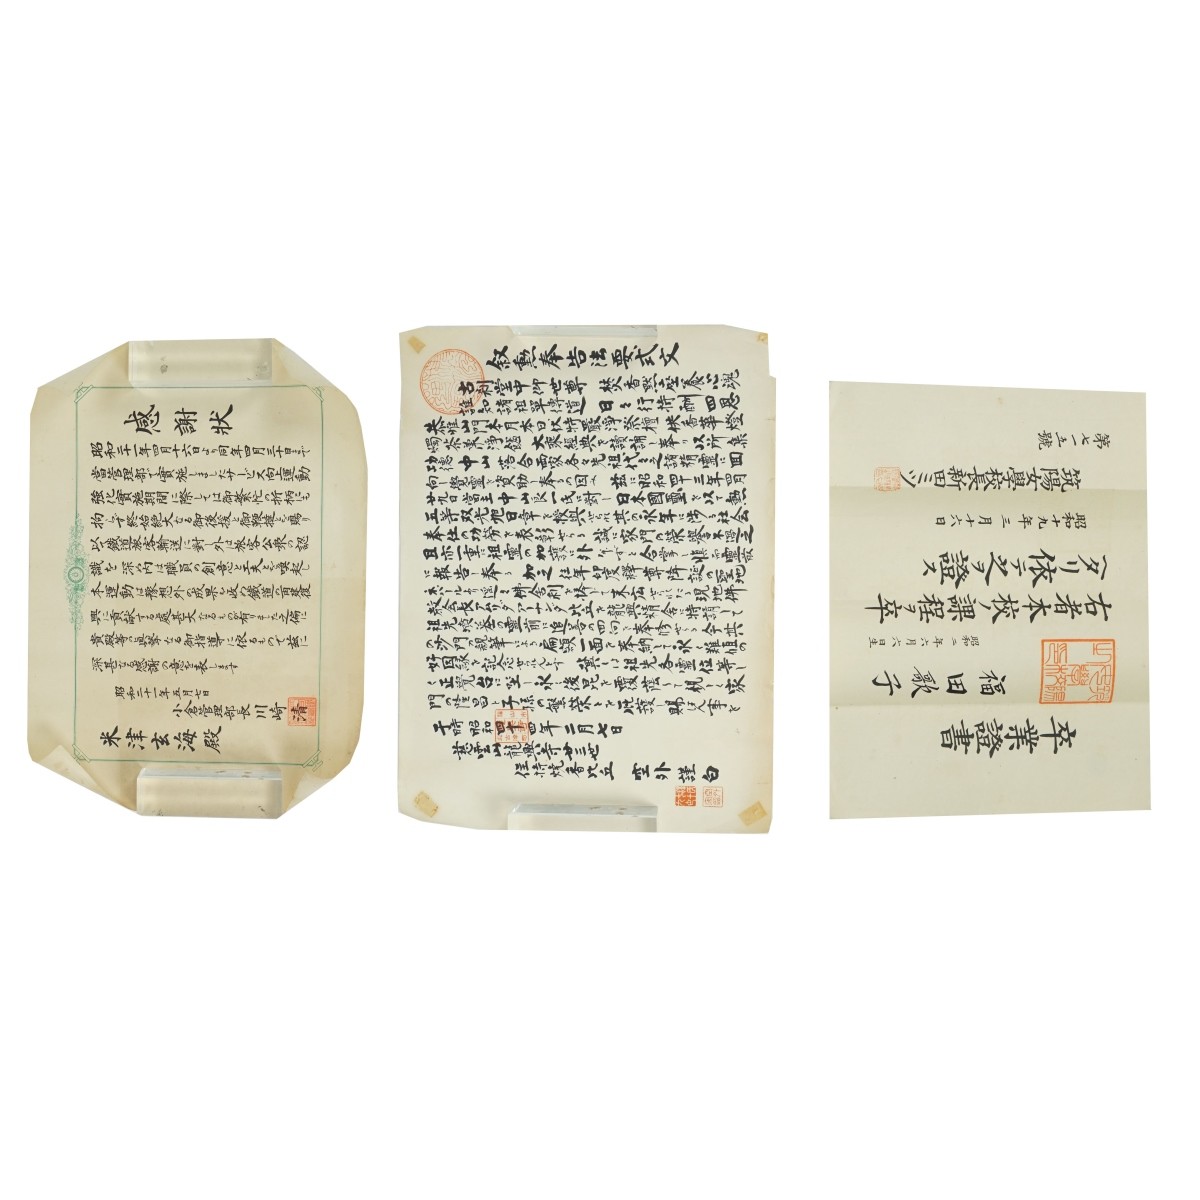 Chinese Documents